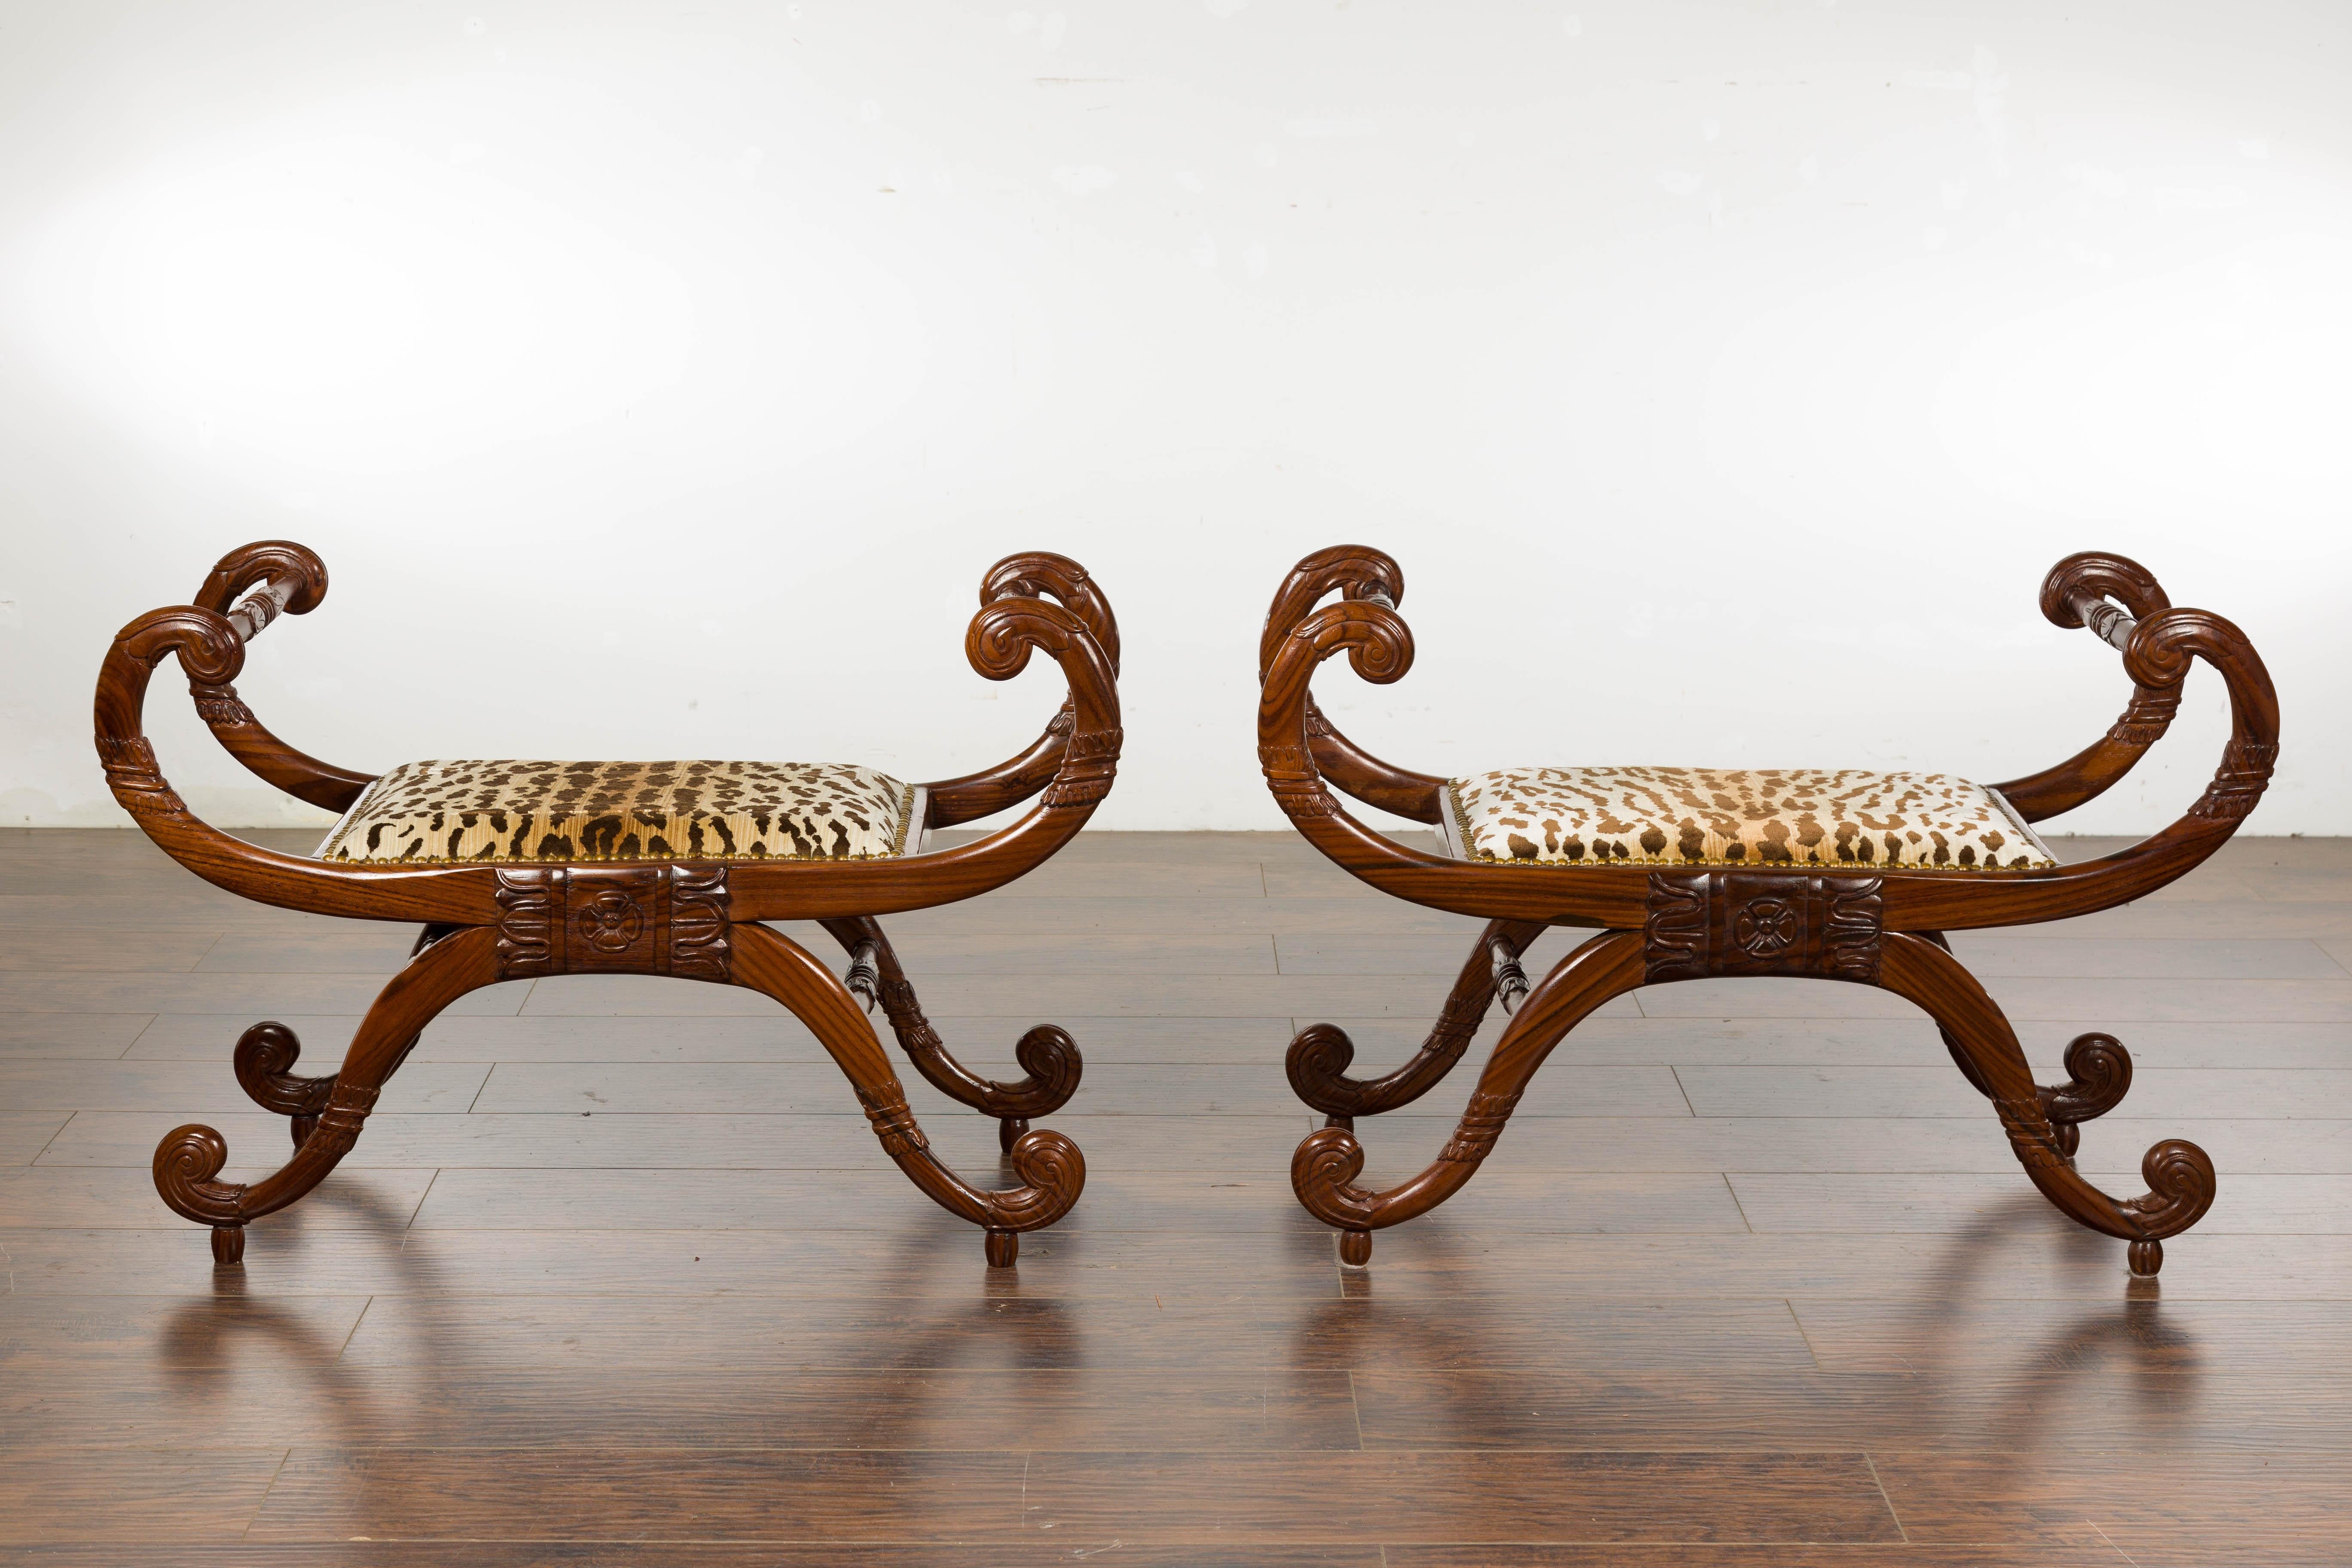 A pair of English Regency mahogany stools from the 19th century with large scrolling arms and legs, carved foliage and tiger style upholstered seats. Imbue your home with the distinguished charm of the 19th-century English Regency period with this